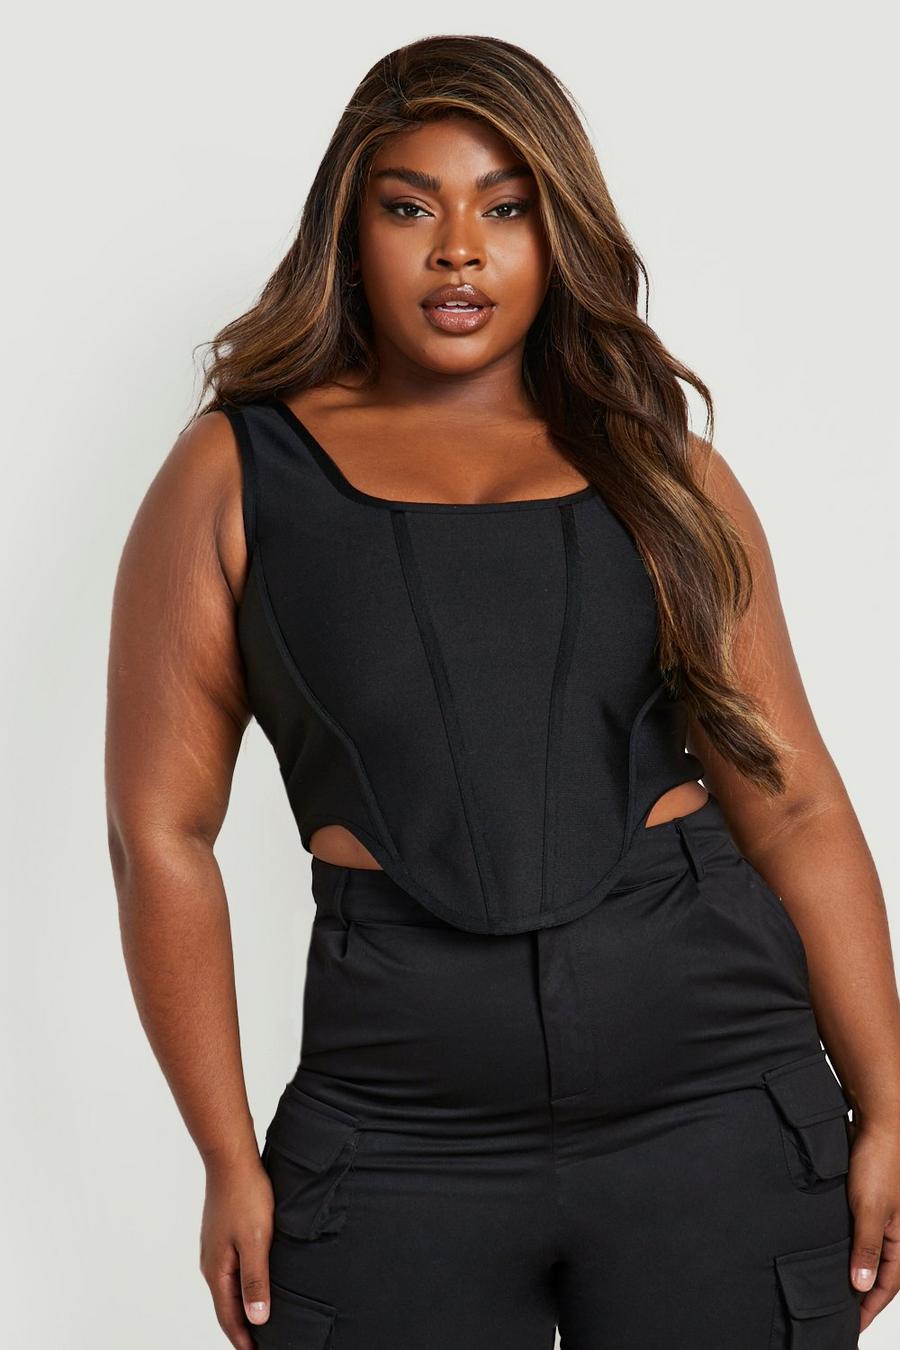 Black Corset Top Tops For Women Sexy Casual Plus Size Christmas